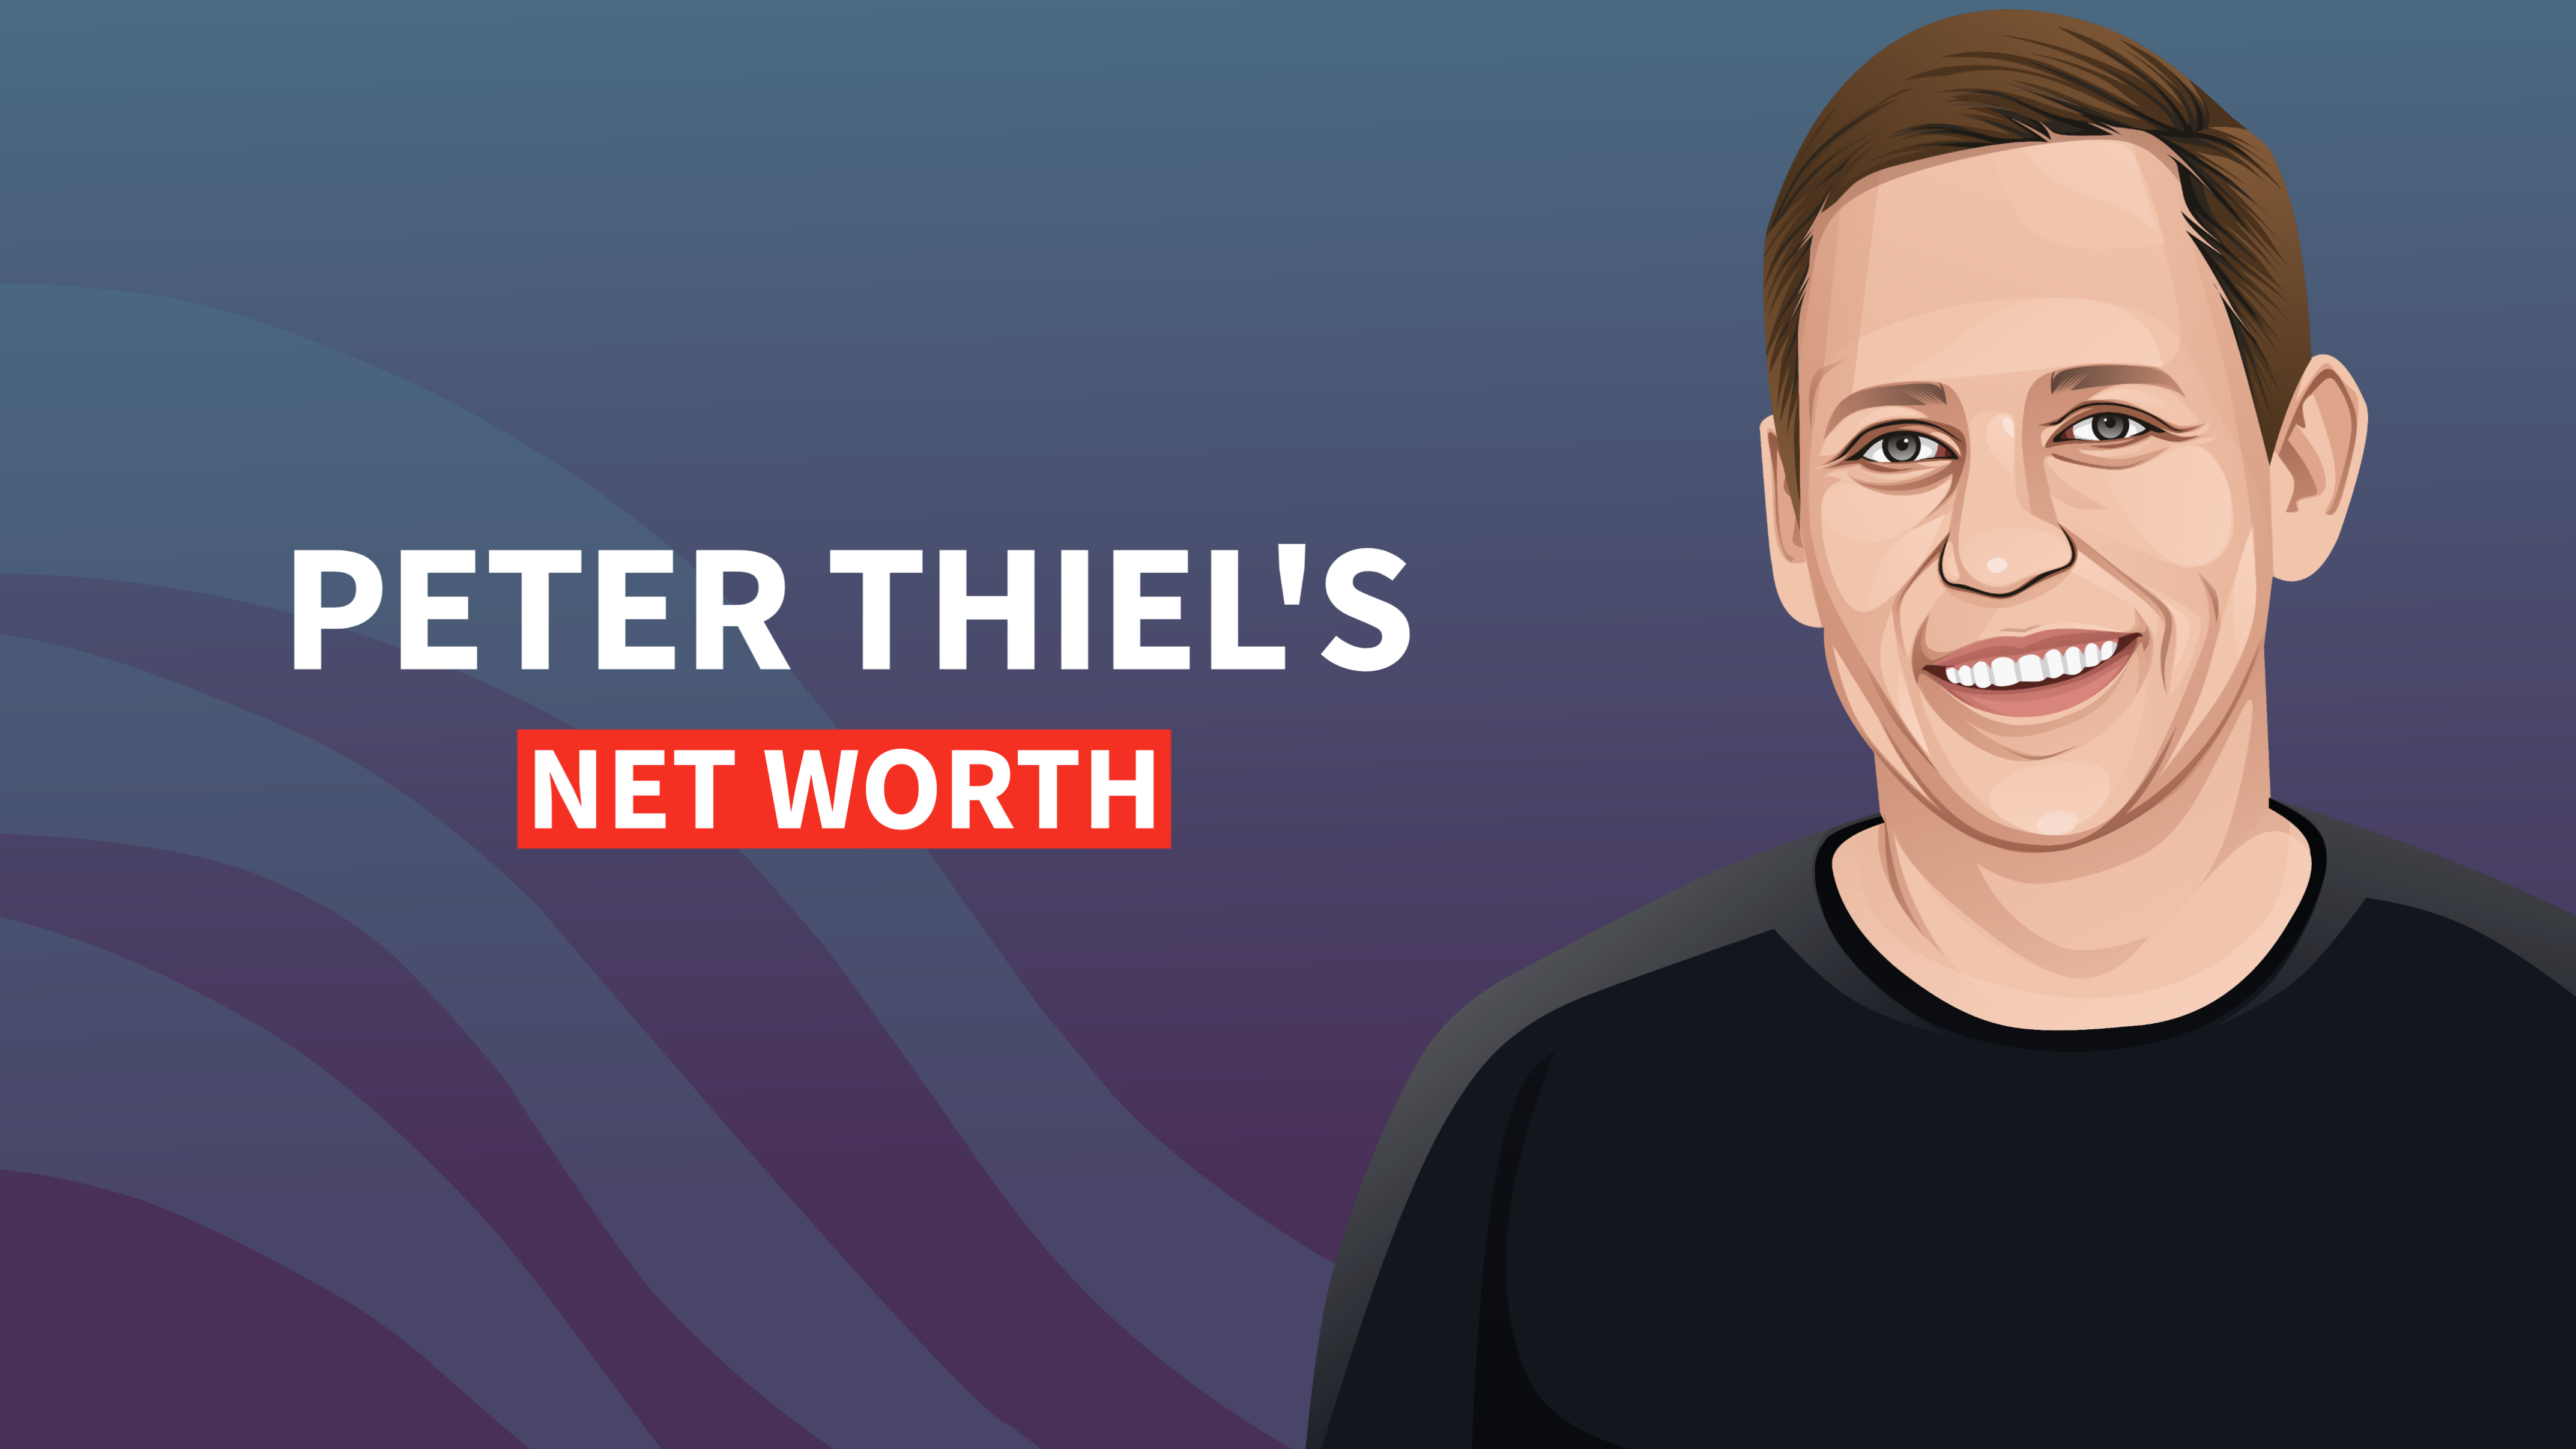 Peter Thiels Net Worth And Inspiring Story